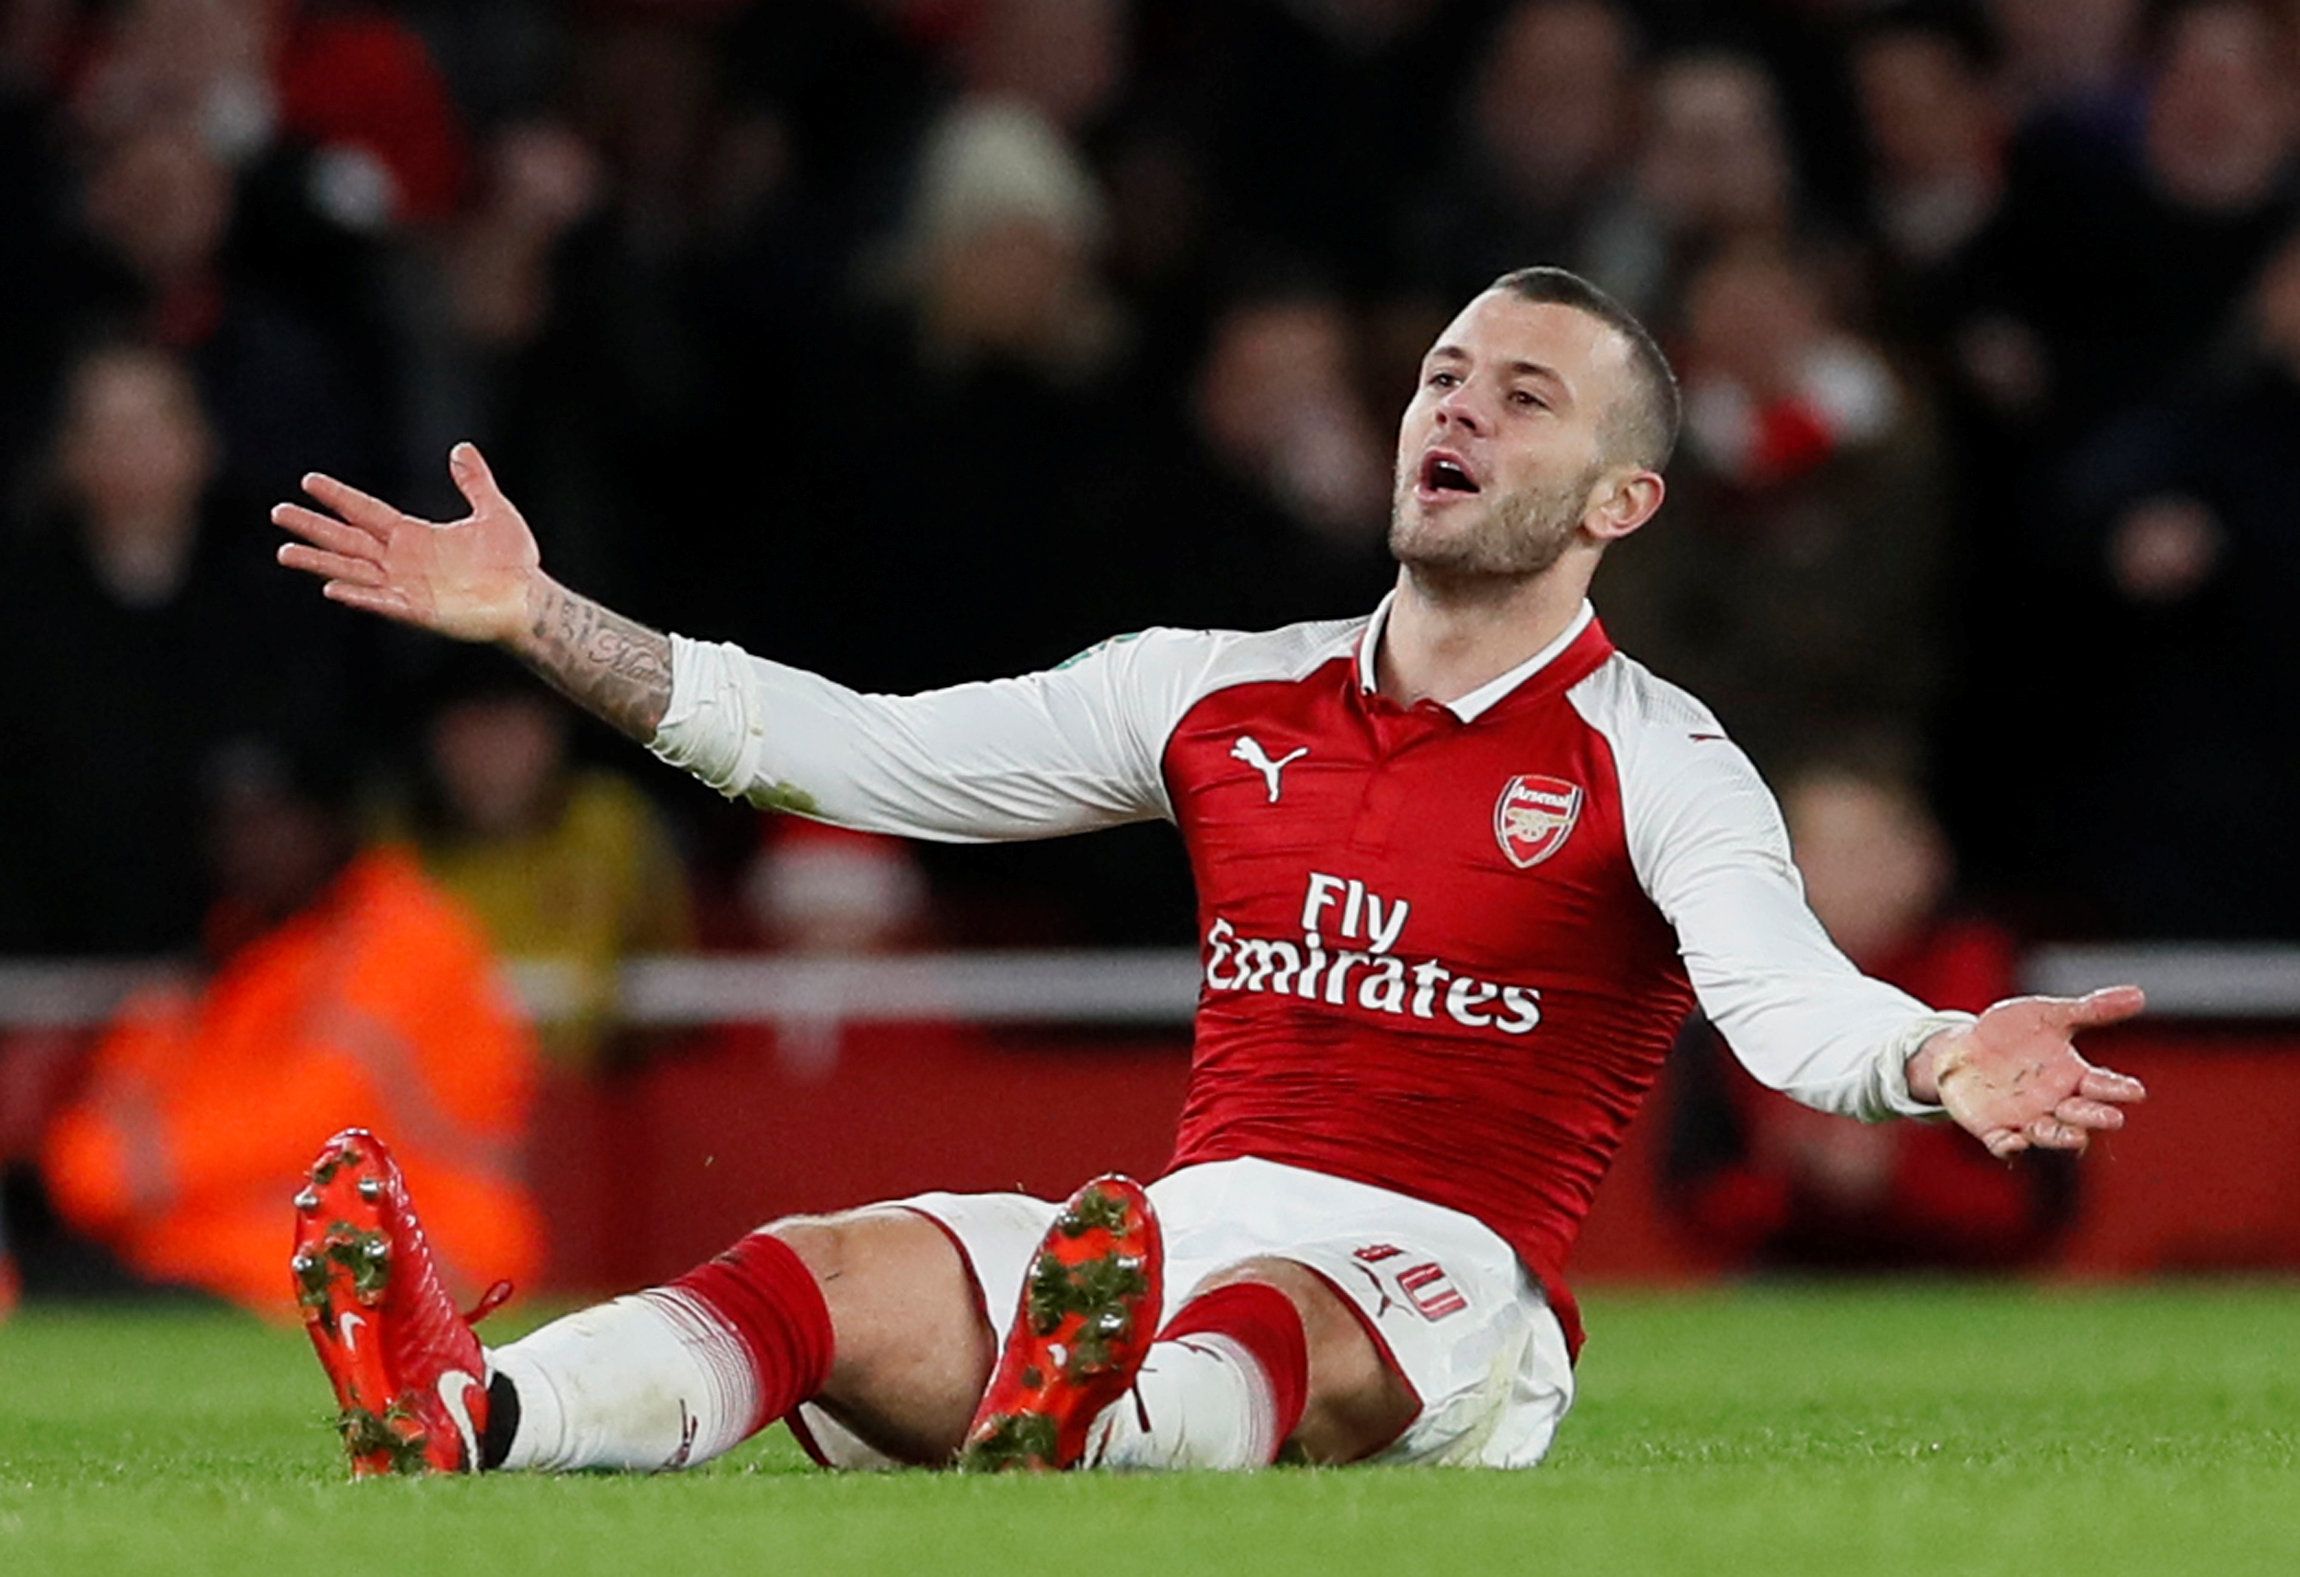 Soccer Football - Carabao Cup Semi Final Second Leg - Arsenal vs Chelsea - Emirates Stadium, London, Britain - January 24, 2018   Arsenal's Jack Wilshere reacts   REUTERS/David Klein    EDITORIAL USE ONLY. No use with unauthorized audio, video, data, fixture lists, club/league logos or 